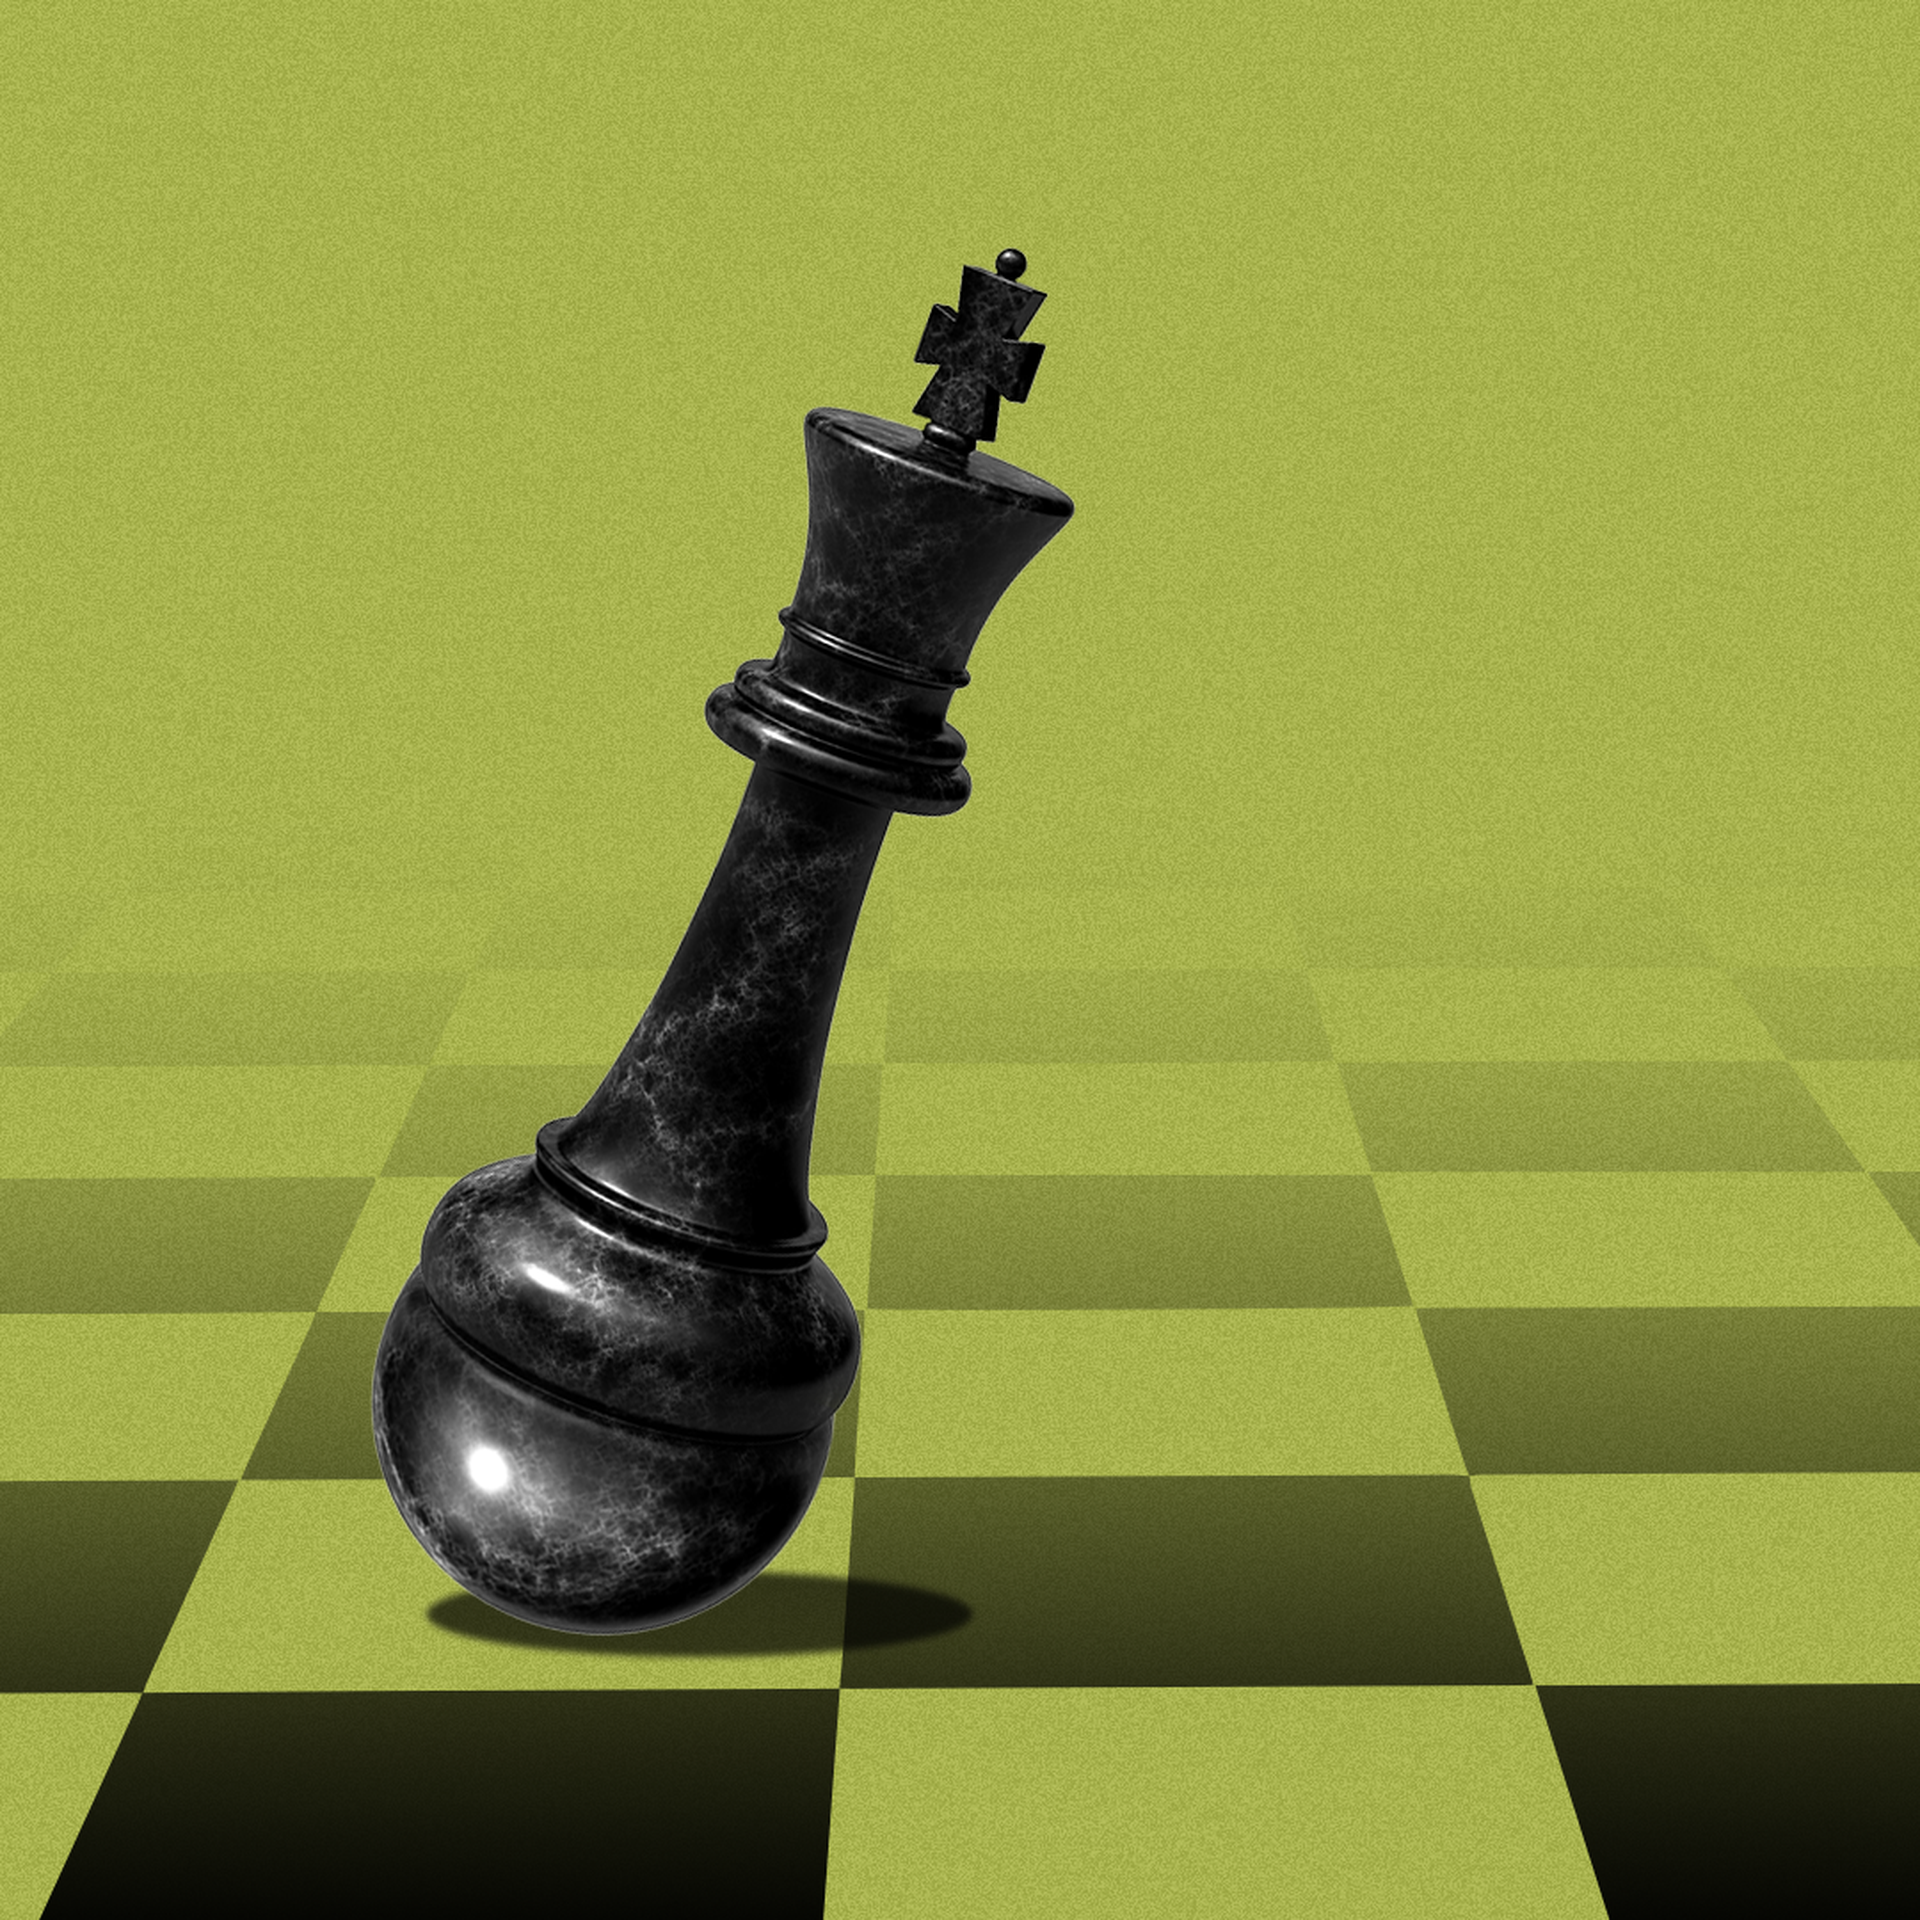 Illustration of a wobbling king chess piece that won't fall down.